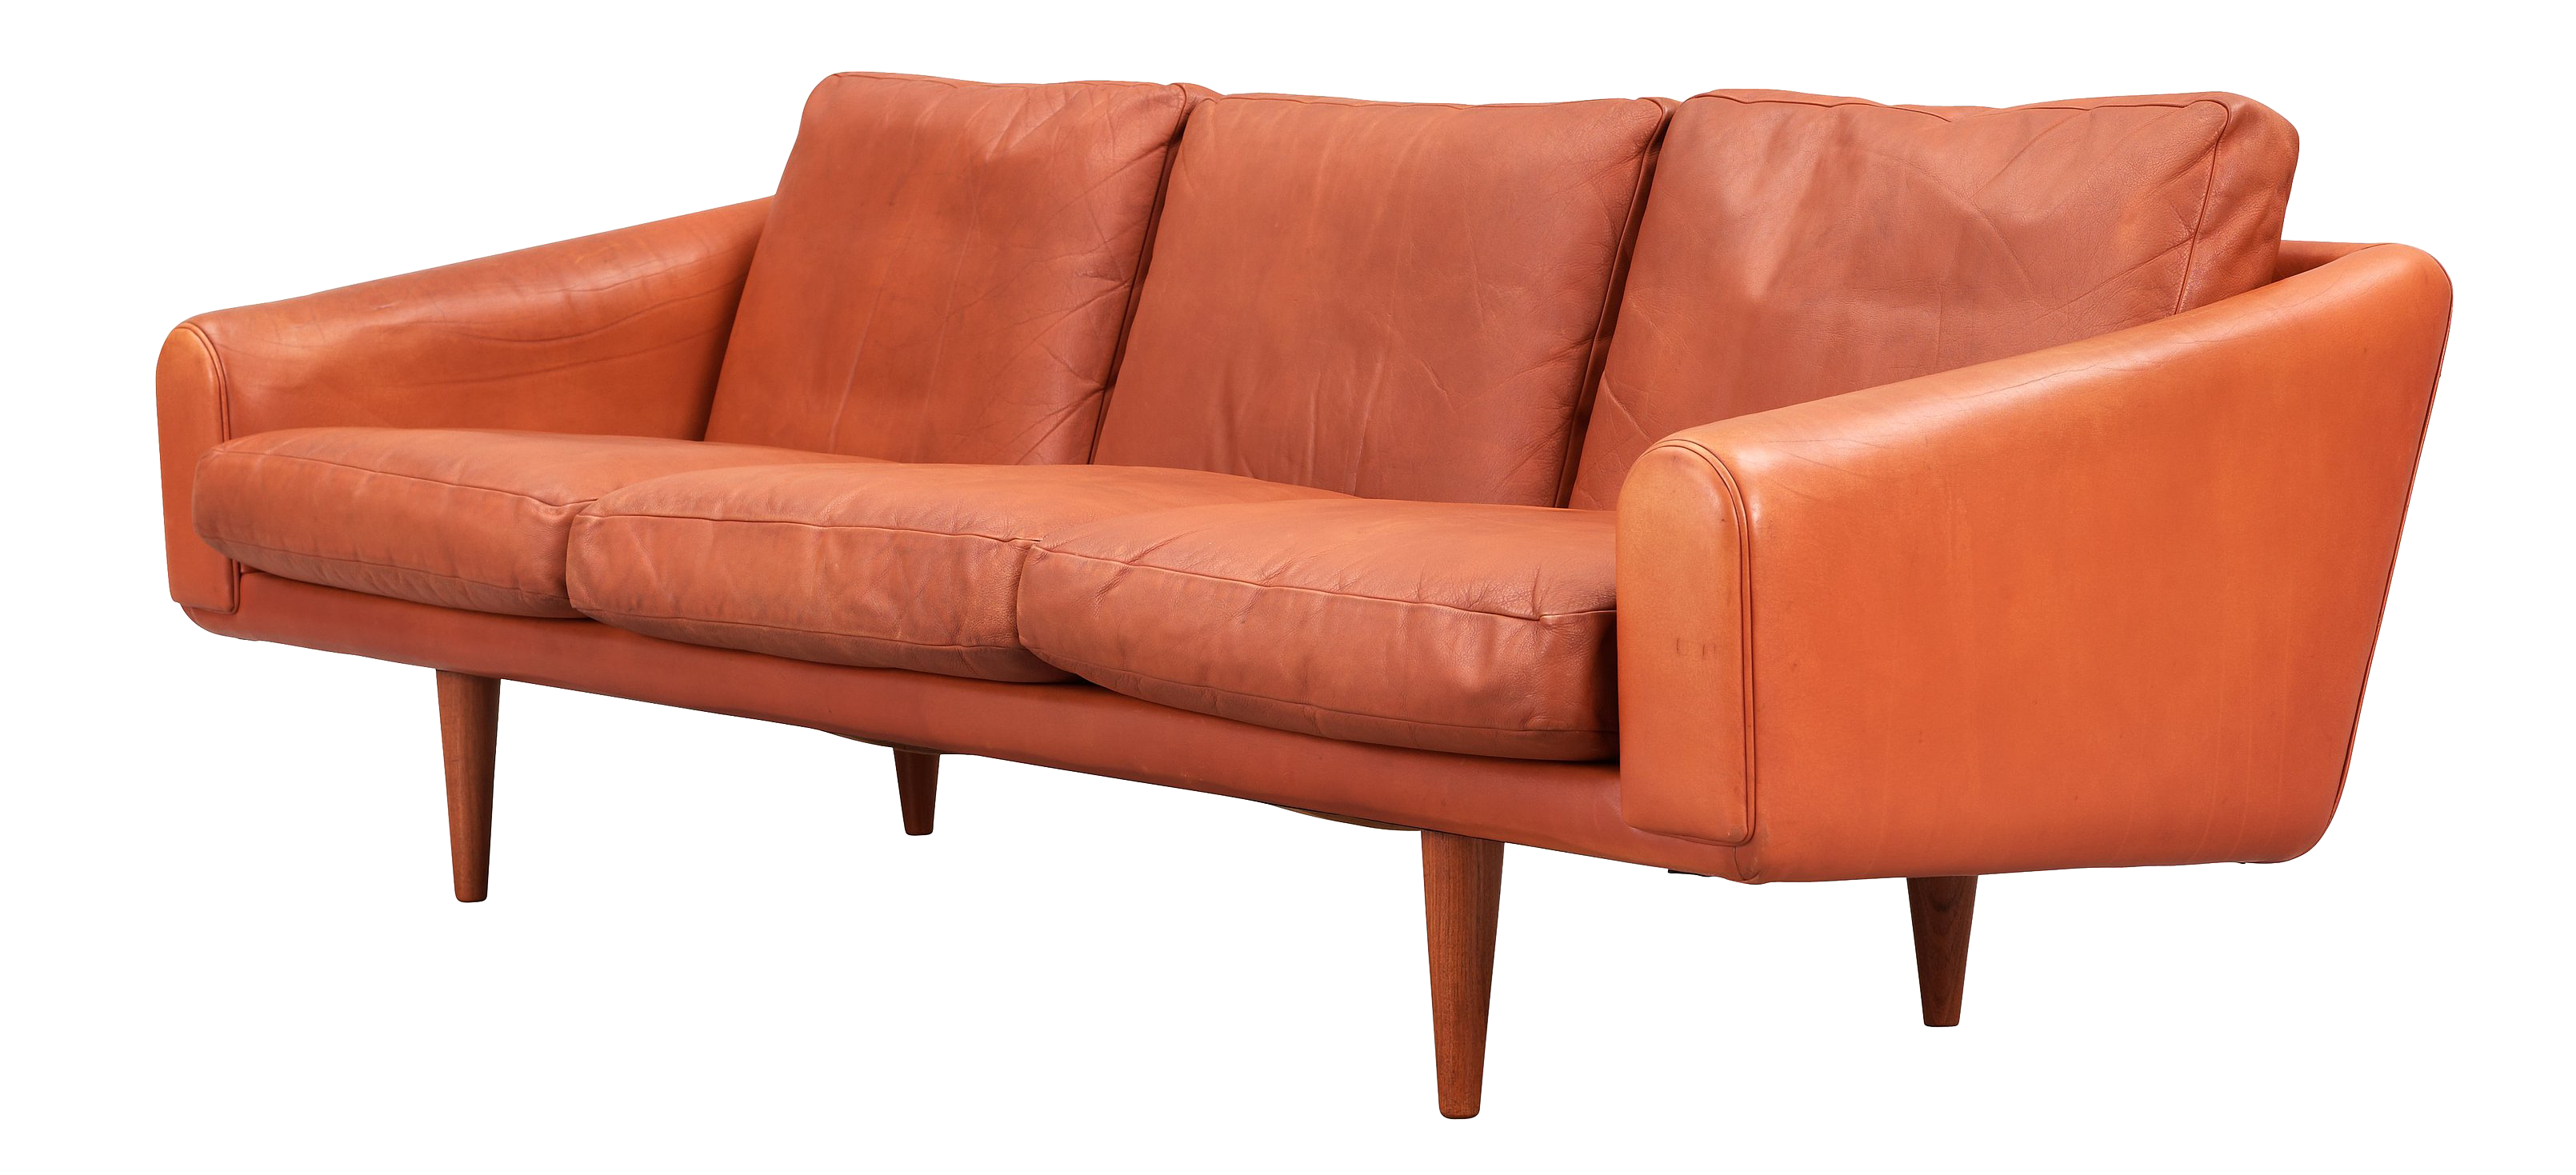 Couch PNG HD Image pngteam.com